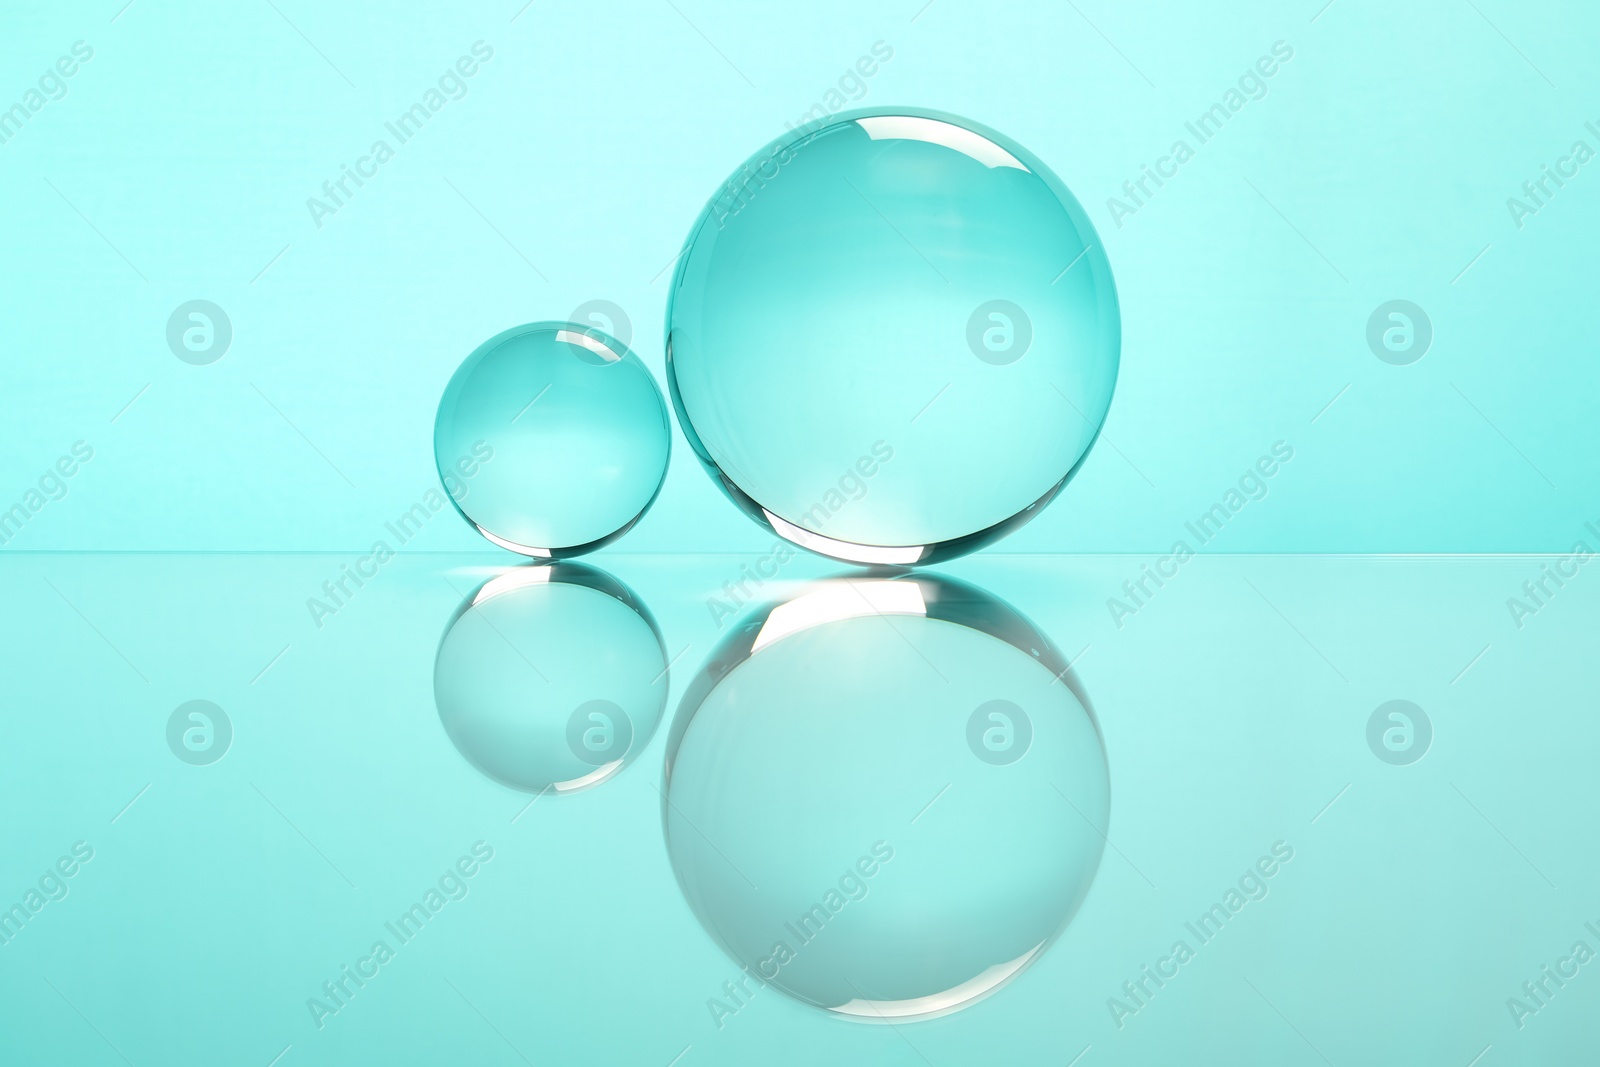 Photo of Transparent glass balls on mirror surface against turquoise background